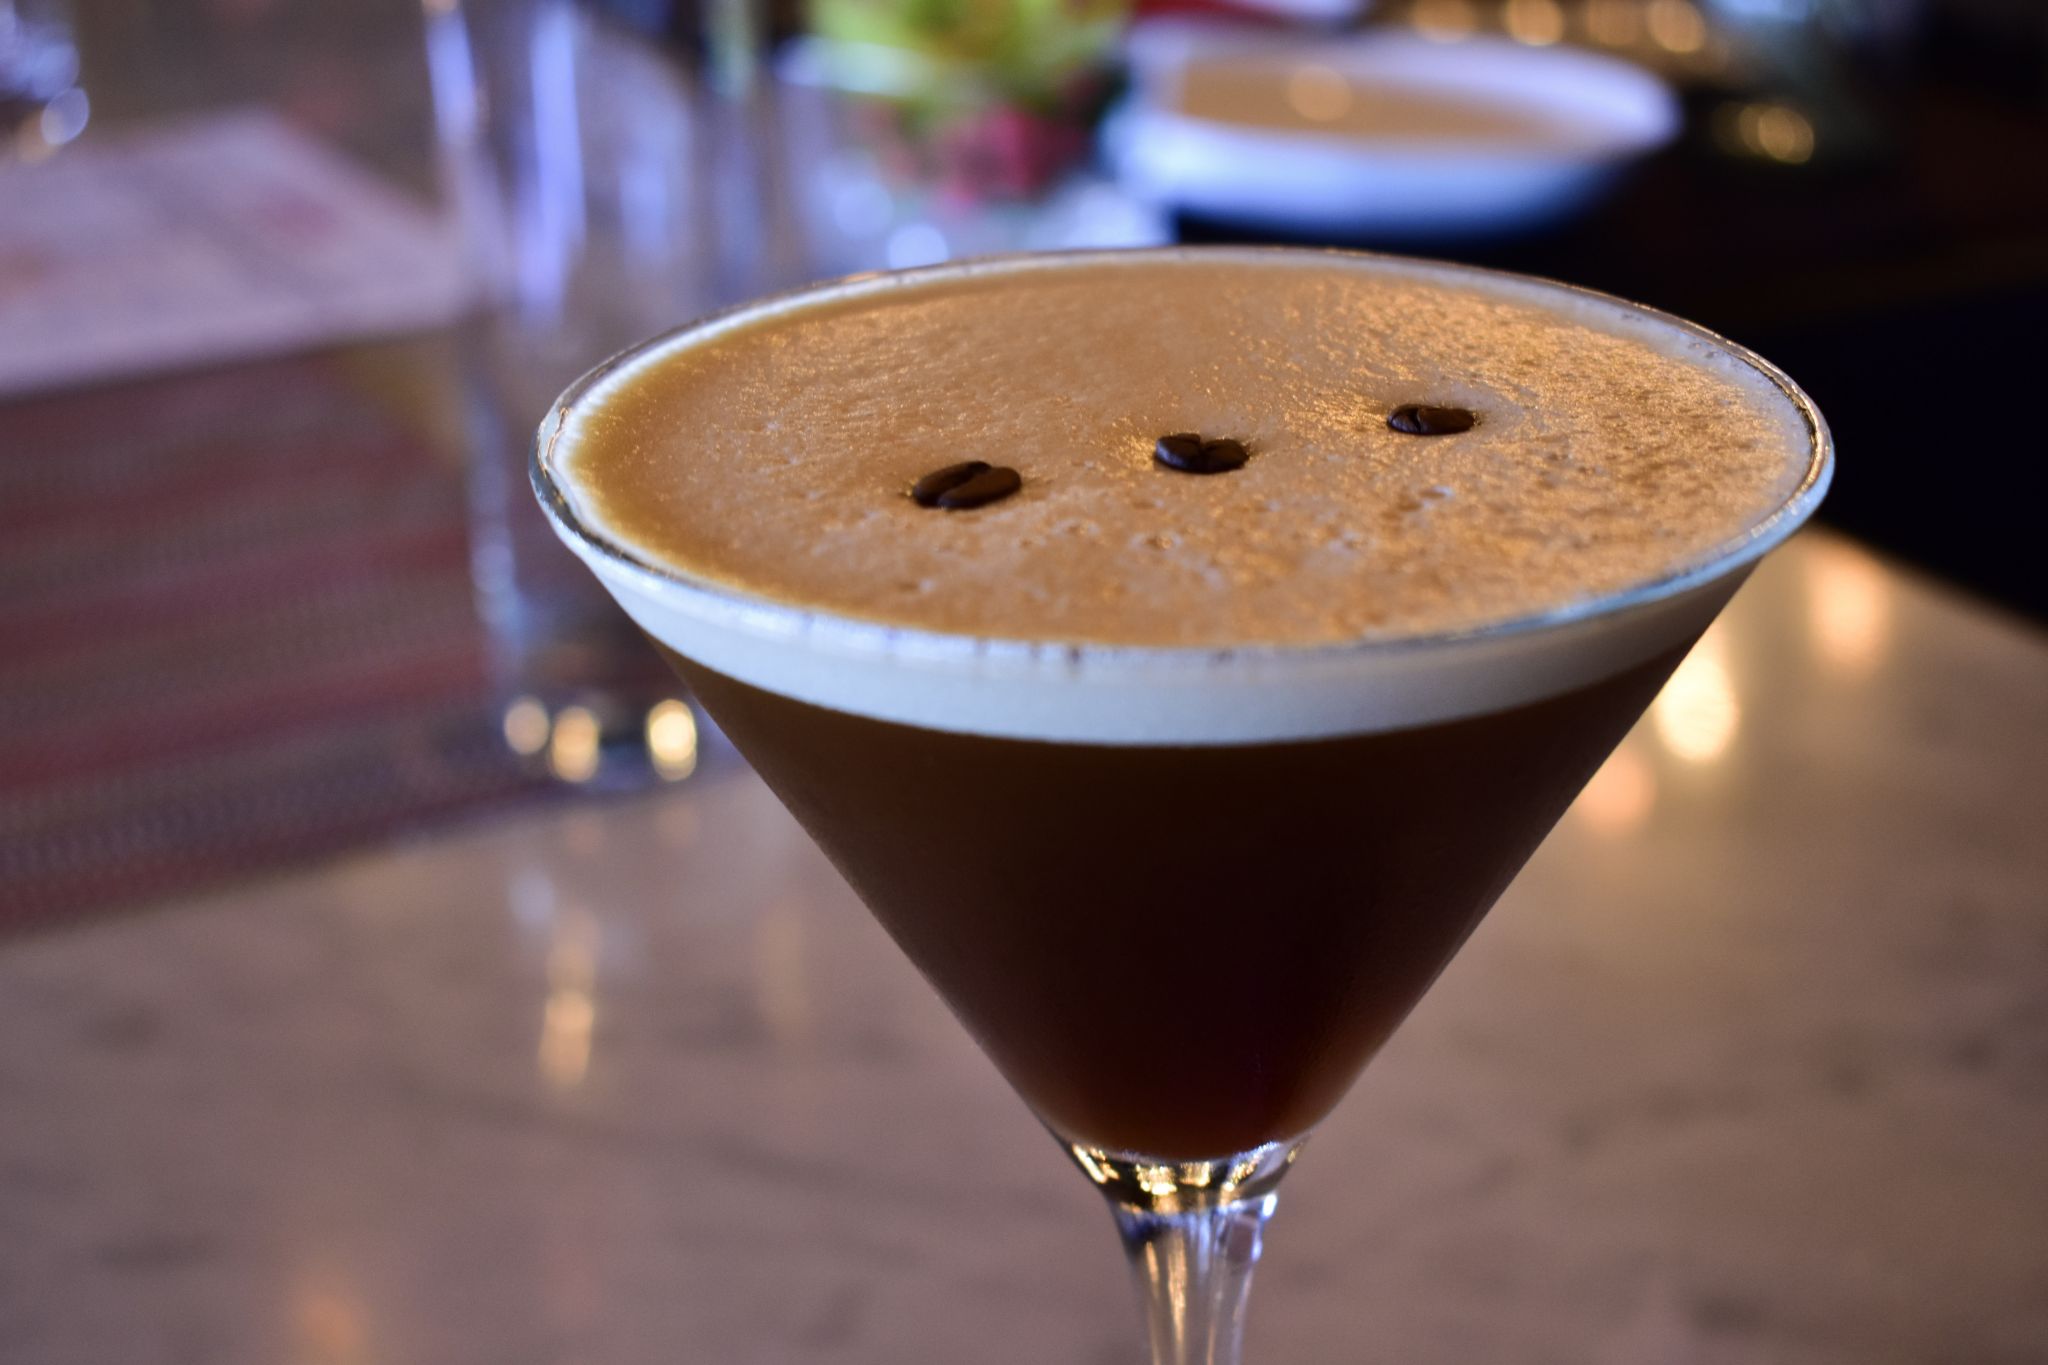 Celebrate National Espresso Martini Day with ready-to-drink CT cocktails